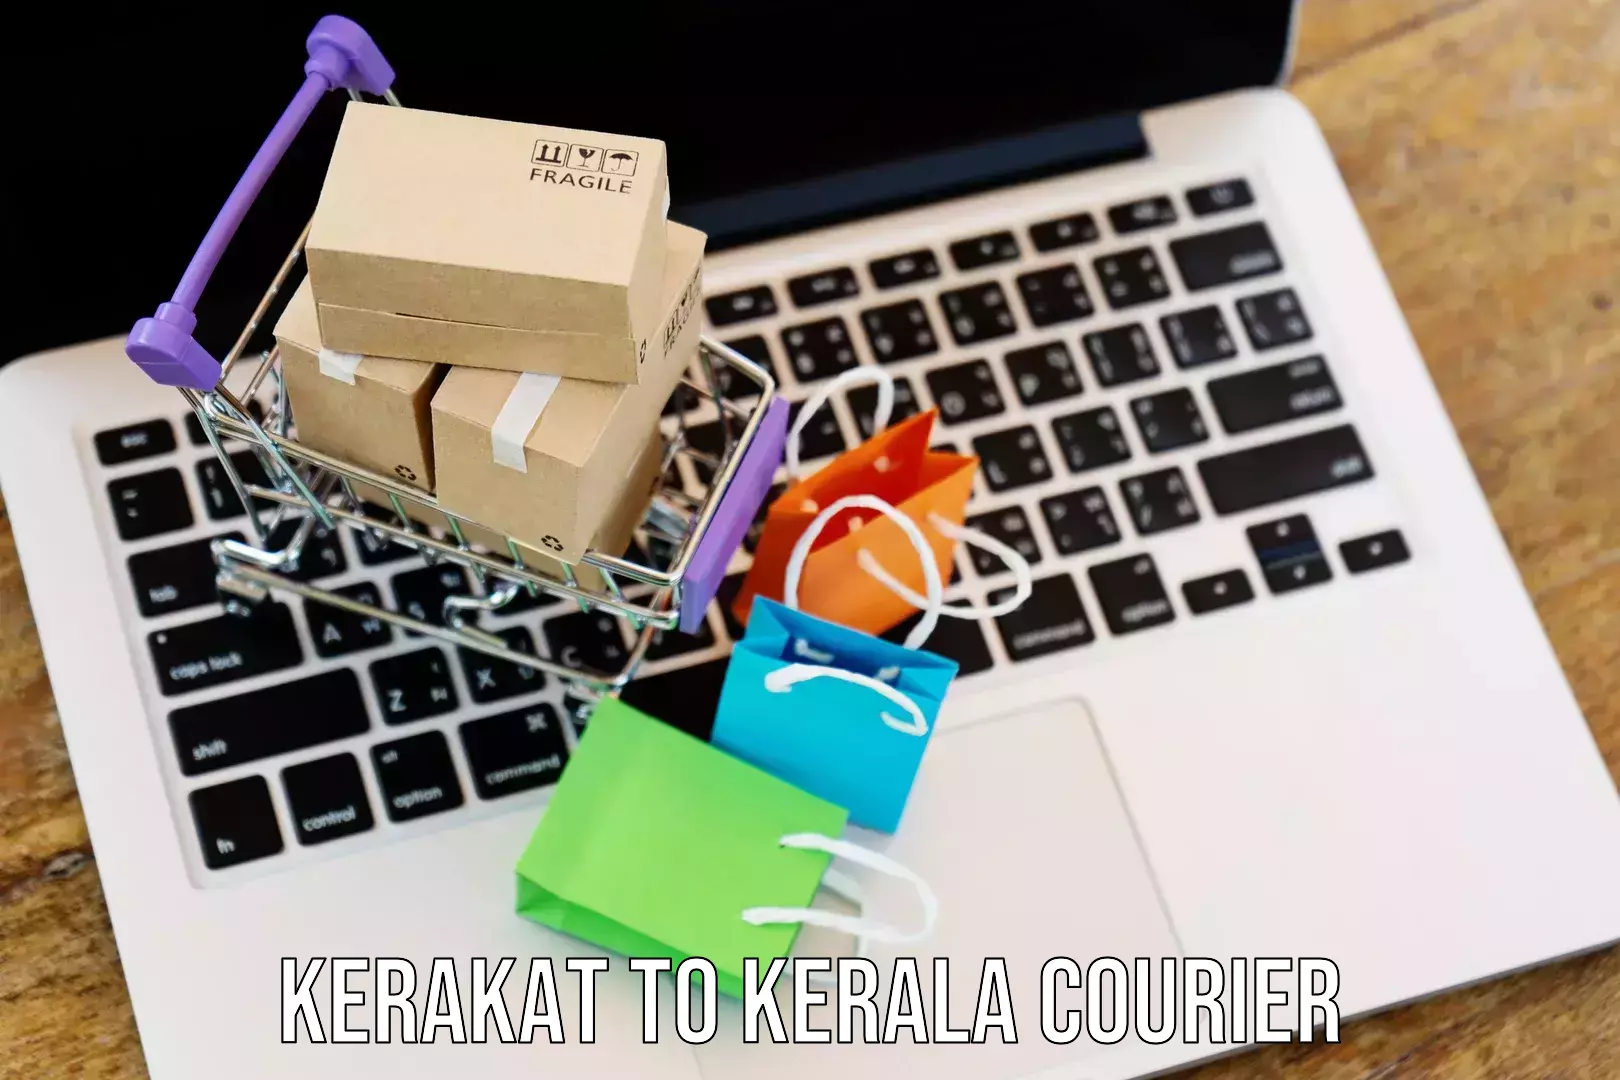 Round-the-clock parcel delivery Kerakat to Kerala